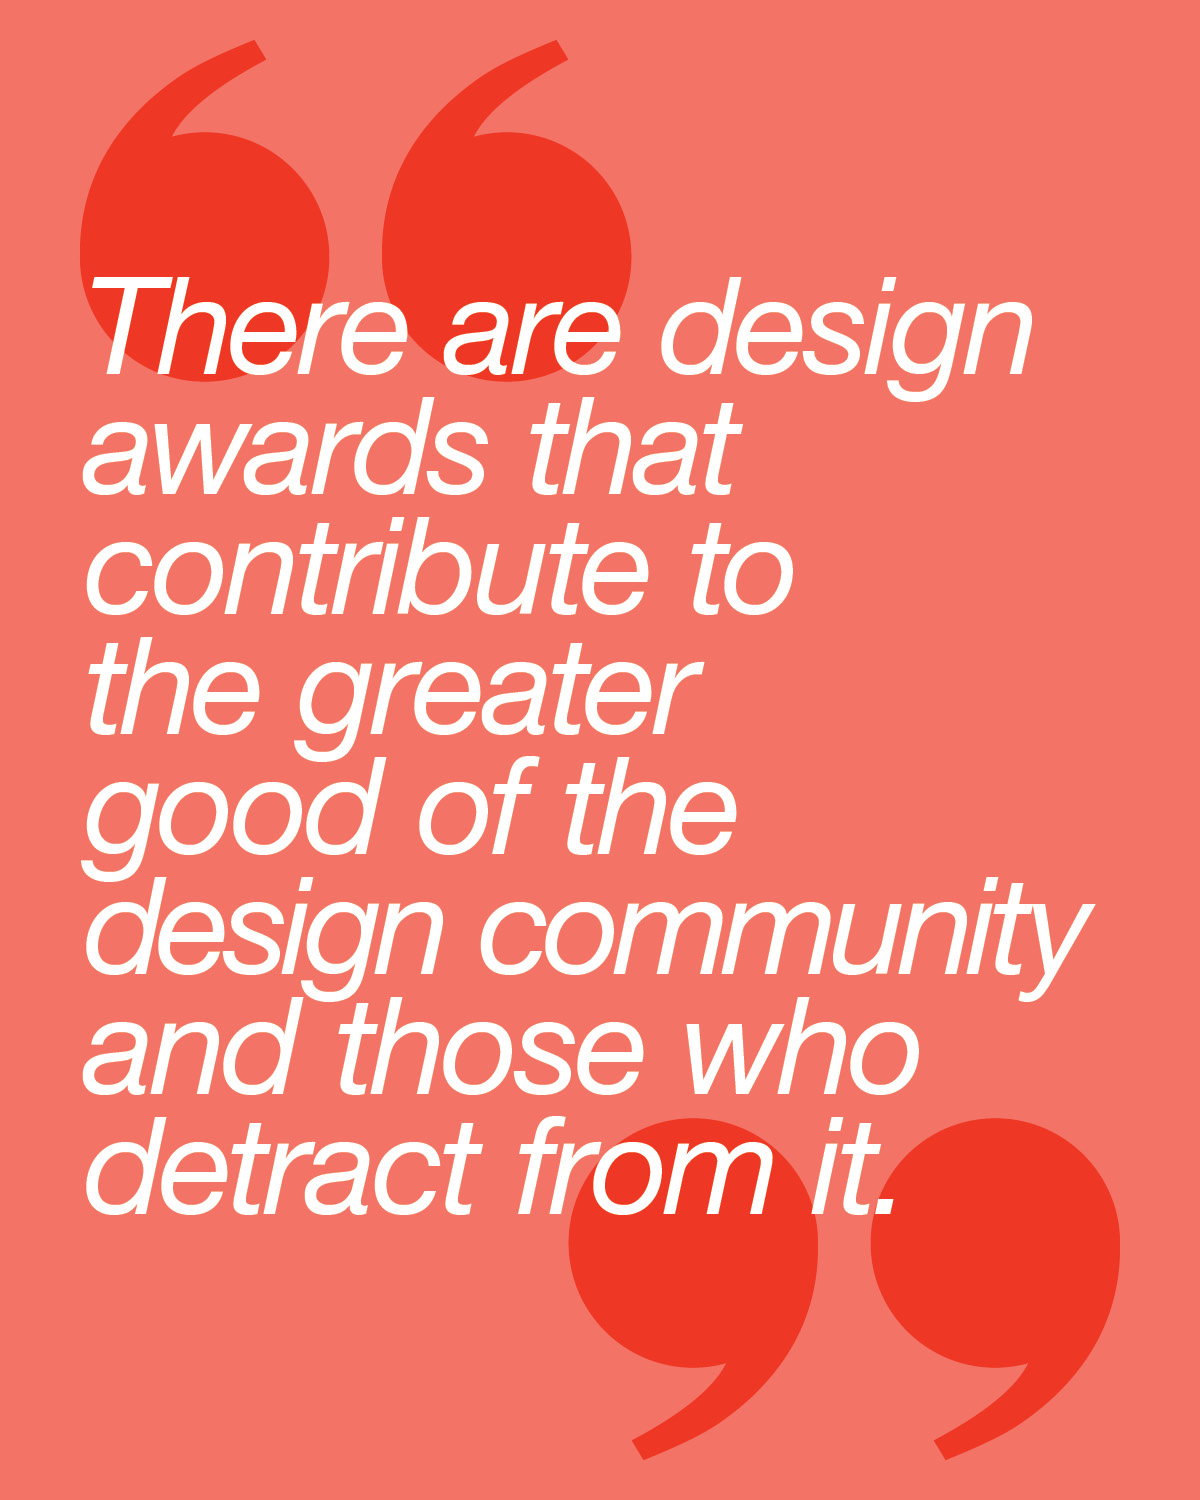 the complicated ethics of design awards